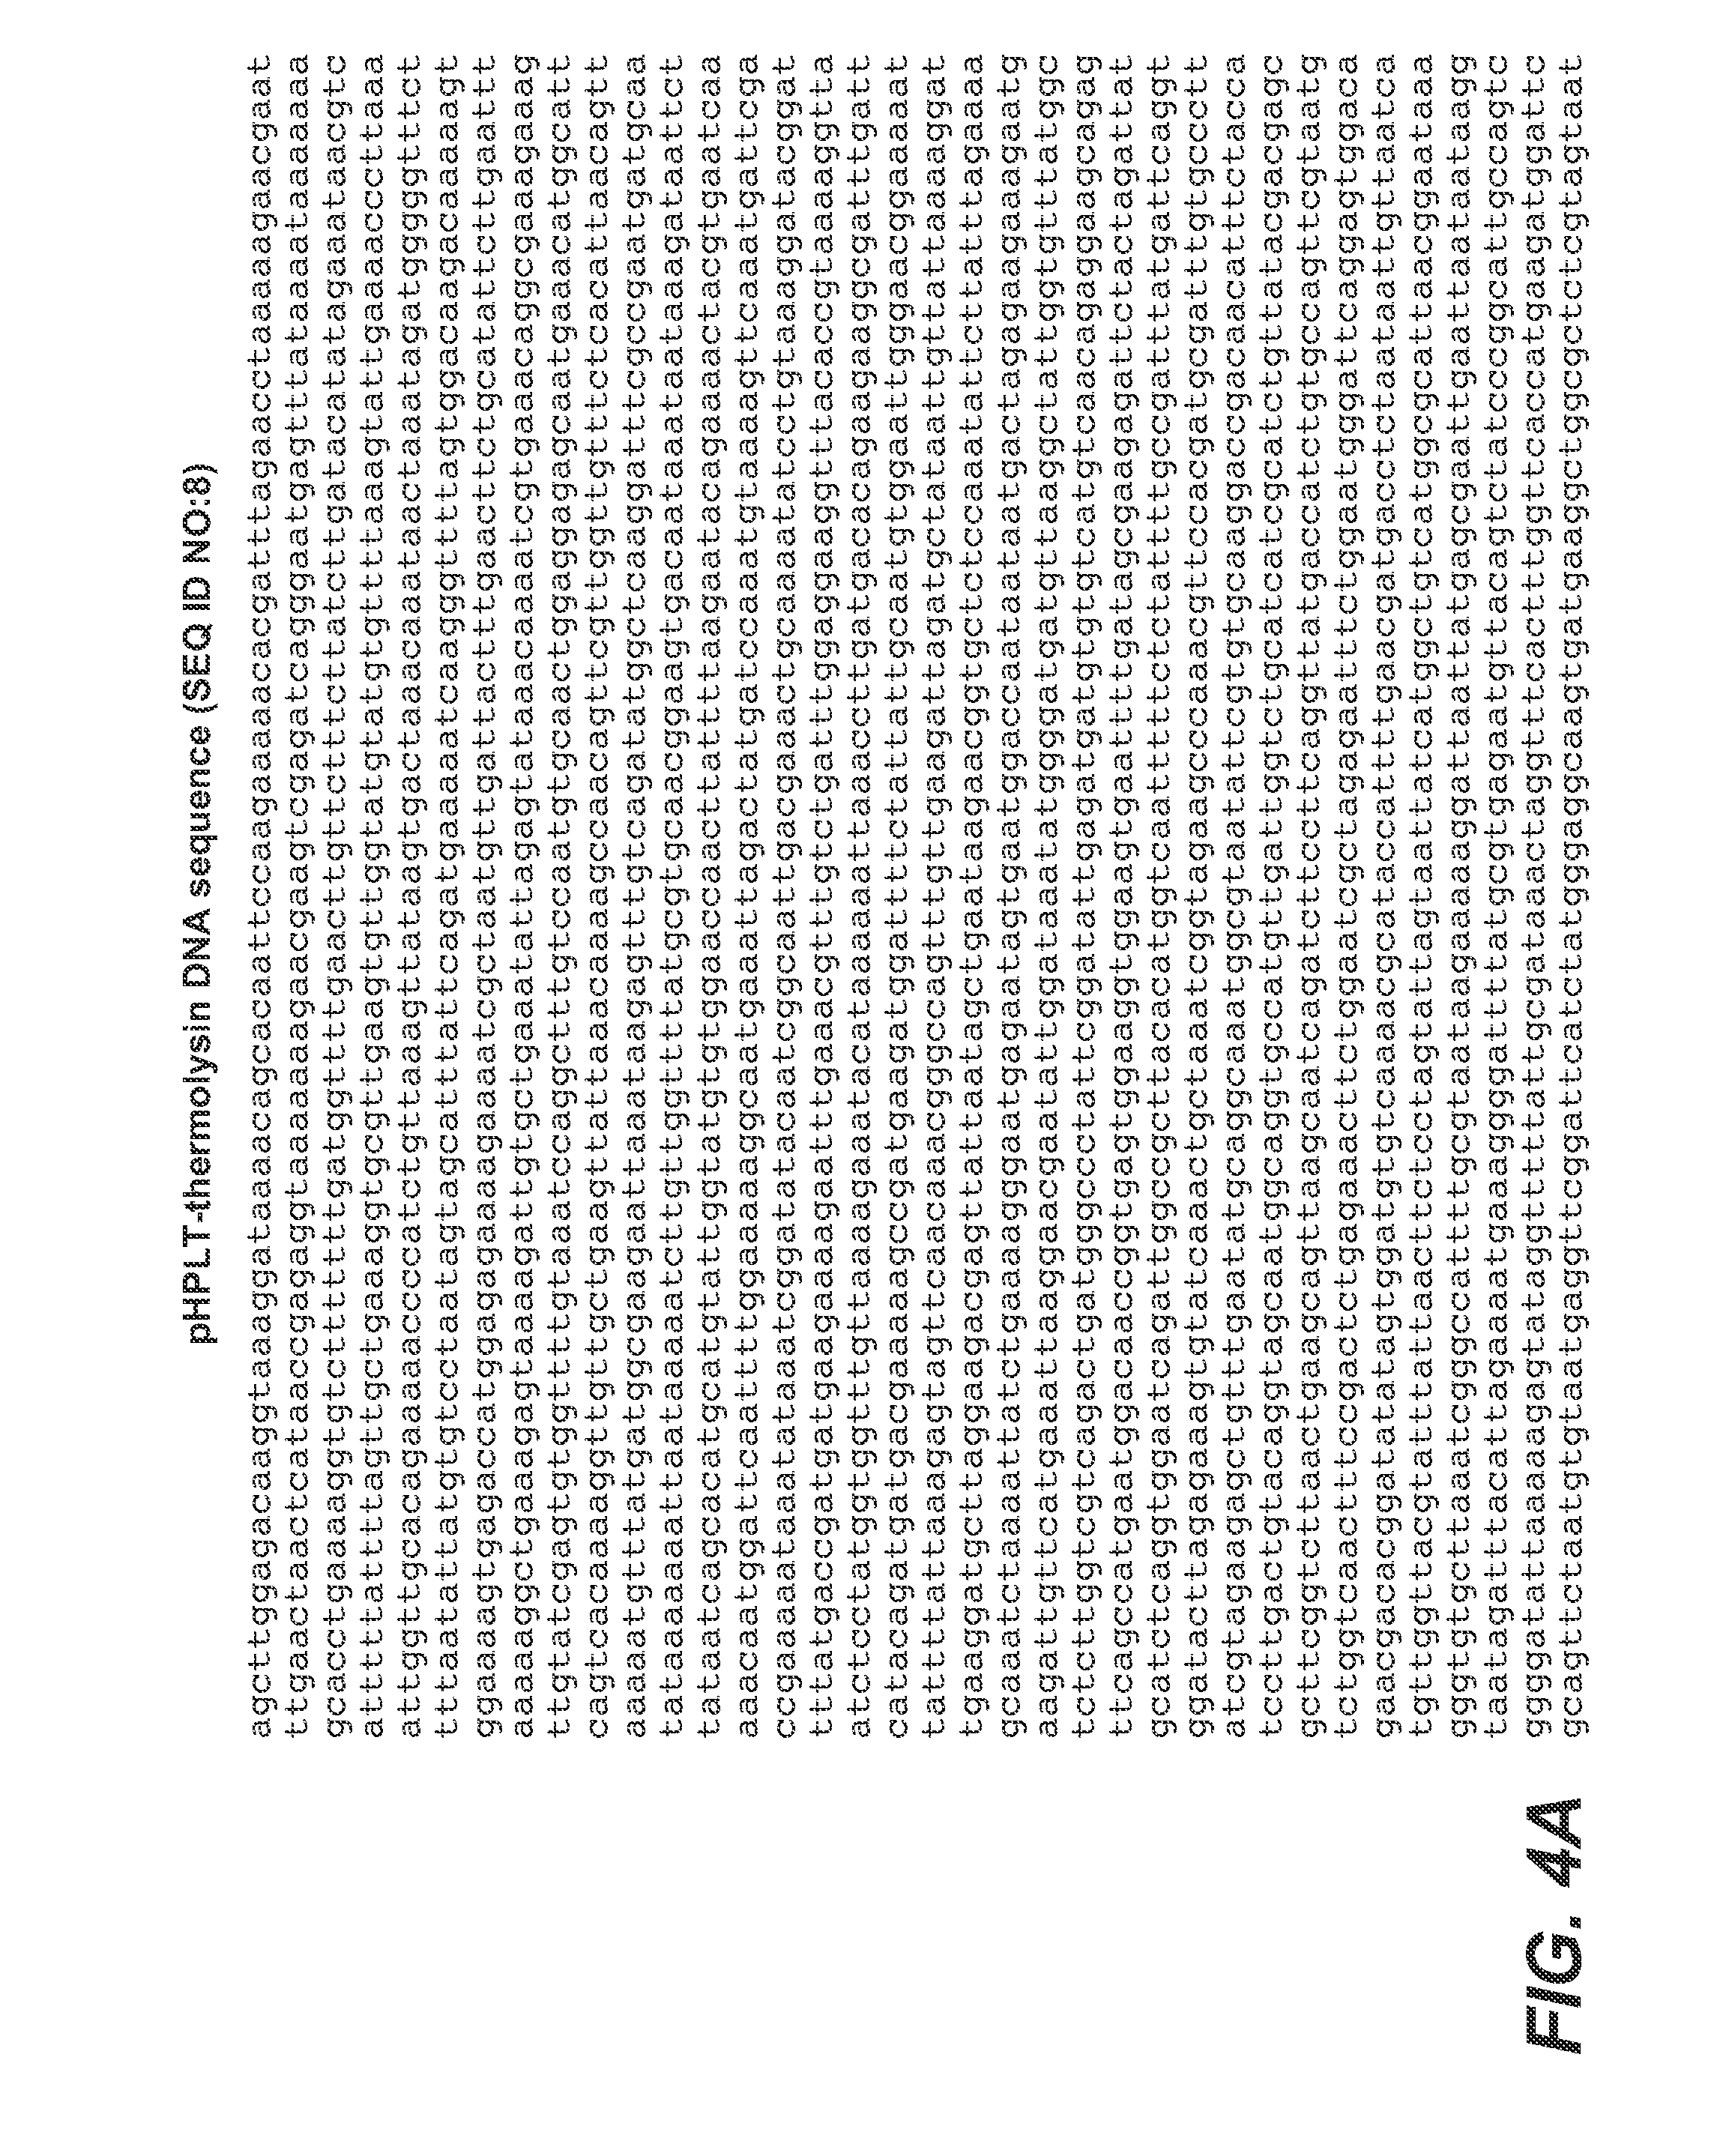 Thermolysin variants and detergent compositions therewith